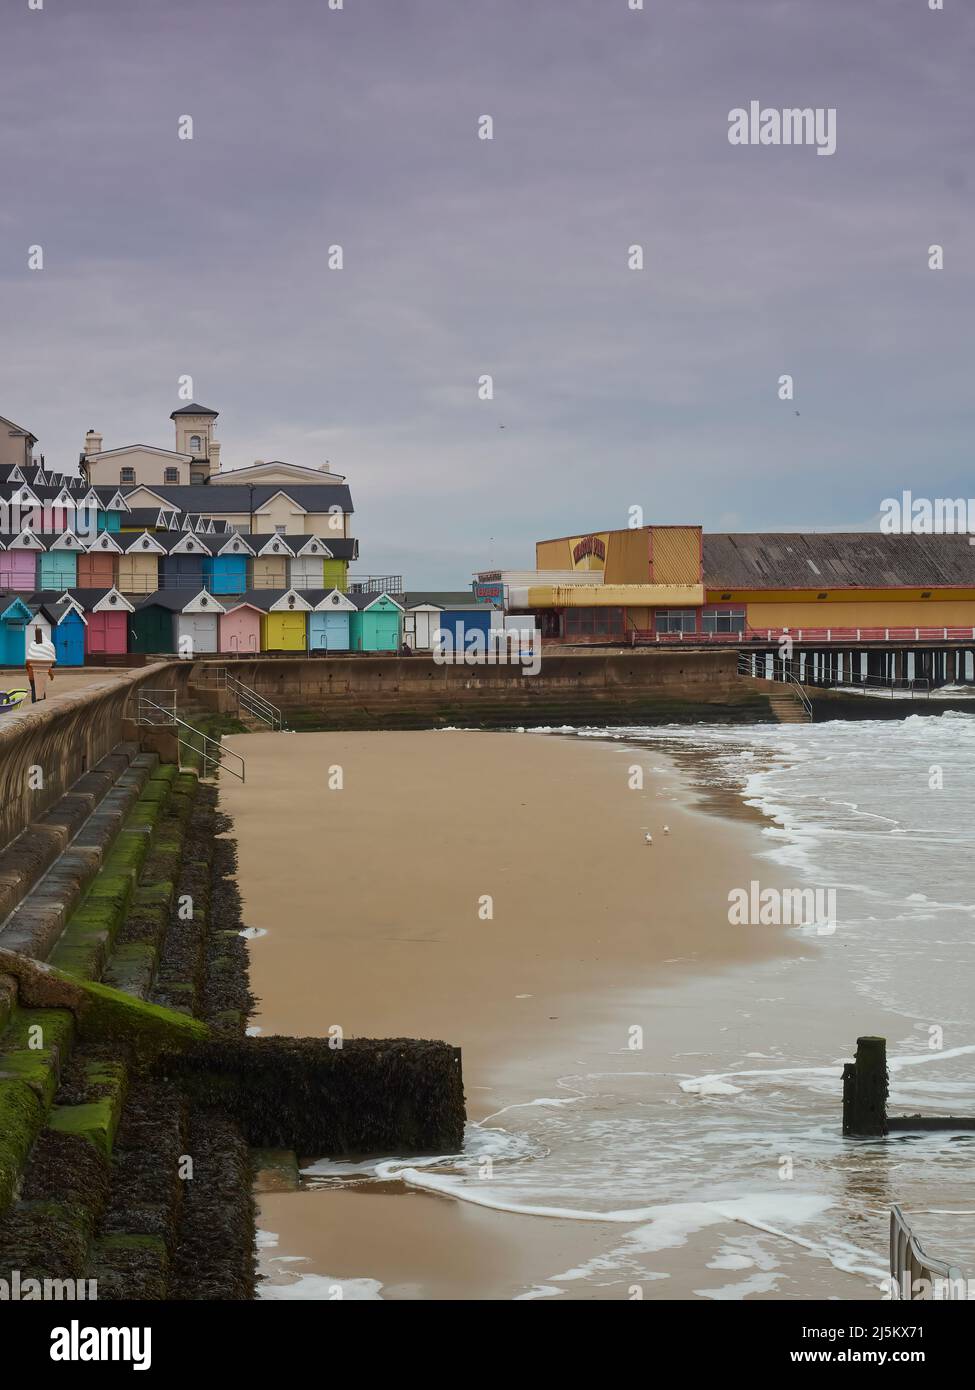 Colourful beach huts on a hill curving to a derelict looking fun fair, wrapping around a bay of breaking waves and sea defences. Stock Photo